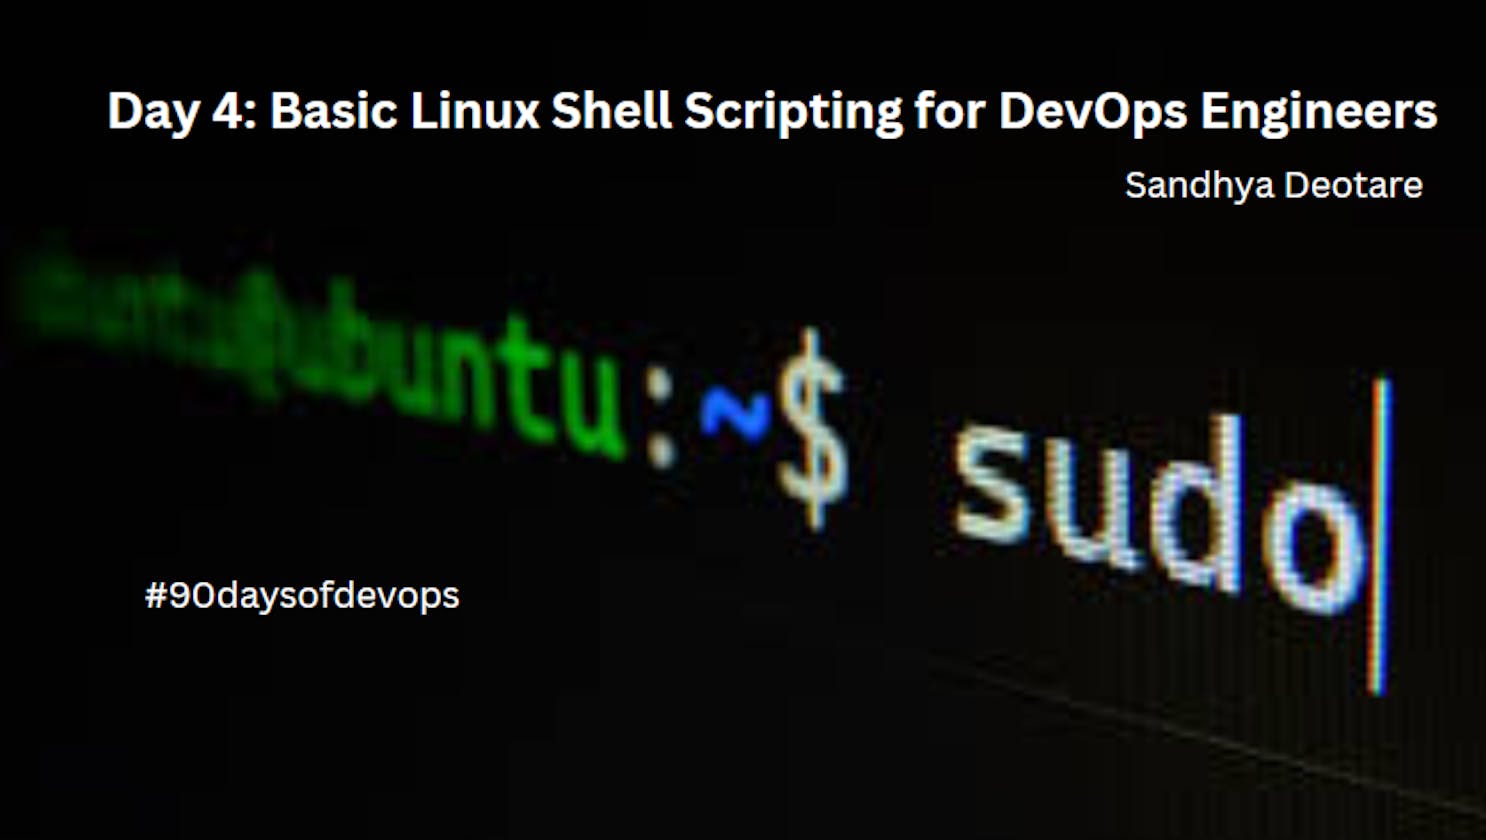 Scripting Success: A Beginner's Guide to Basic Shell Scripting in Linux